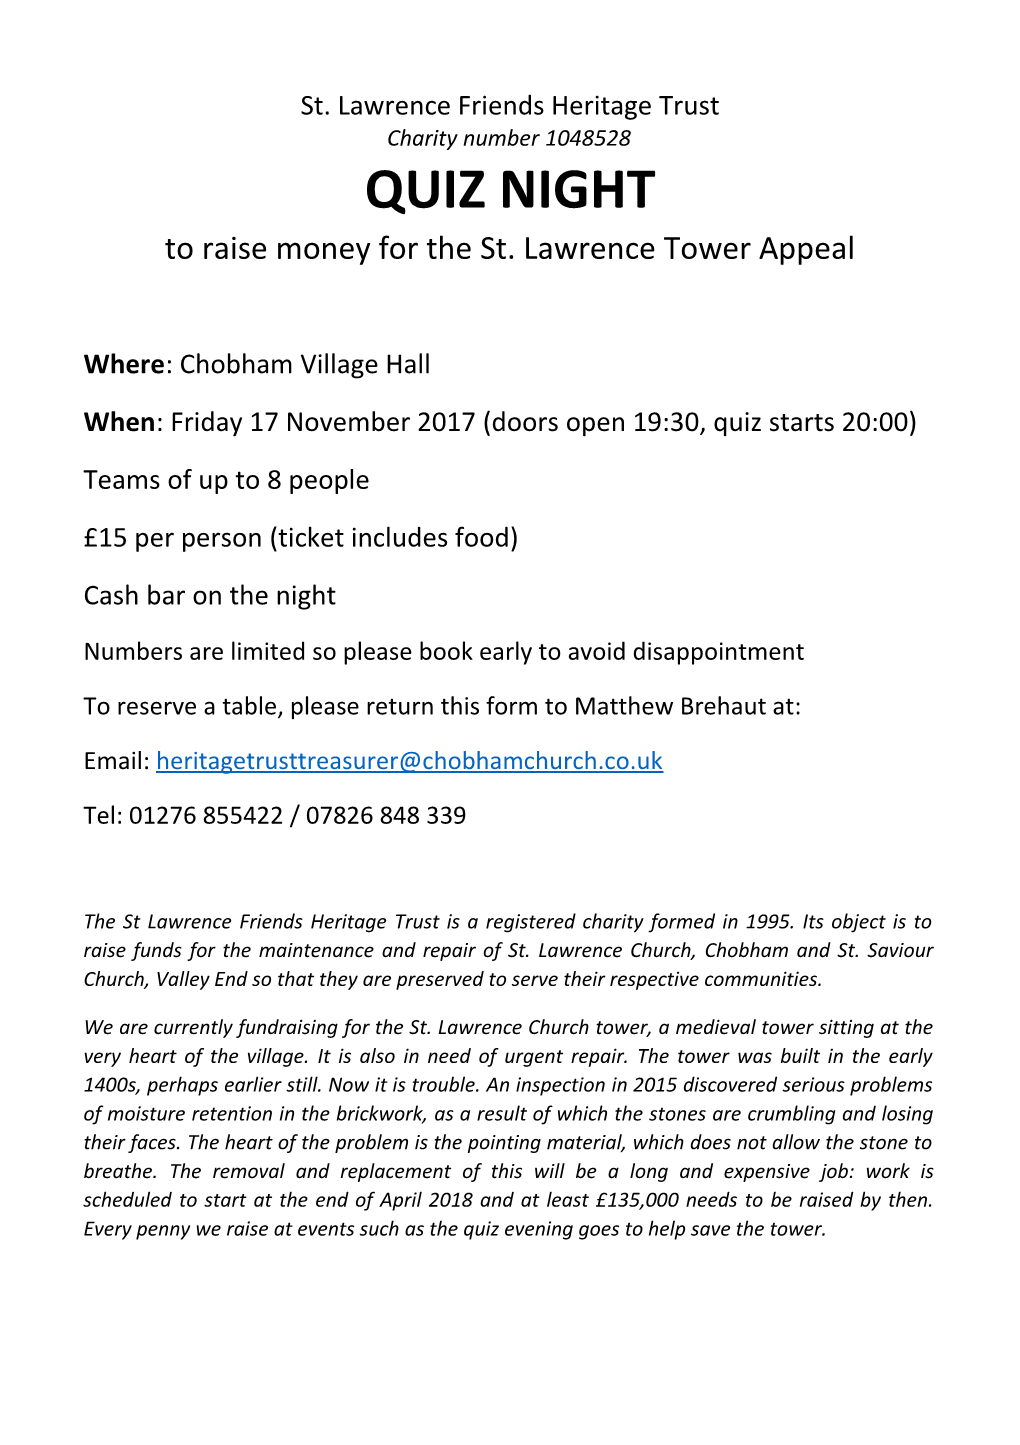 St. Lawrence Friends Heritage Trust Charity Number 1048528